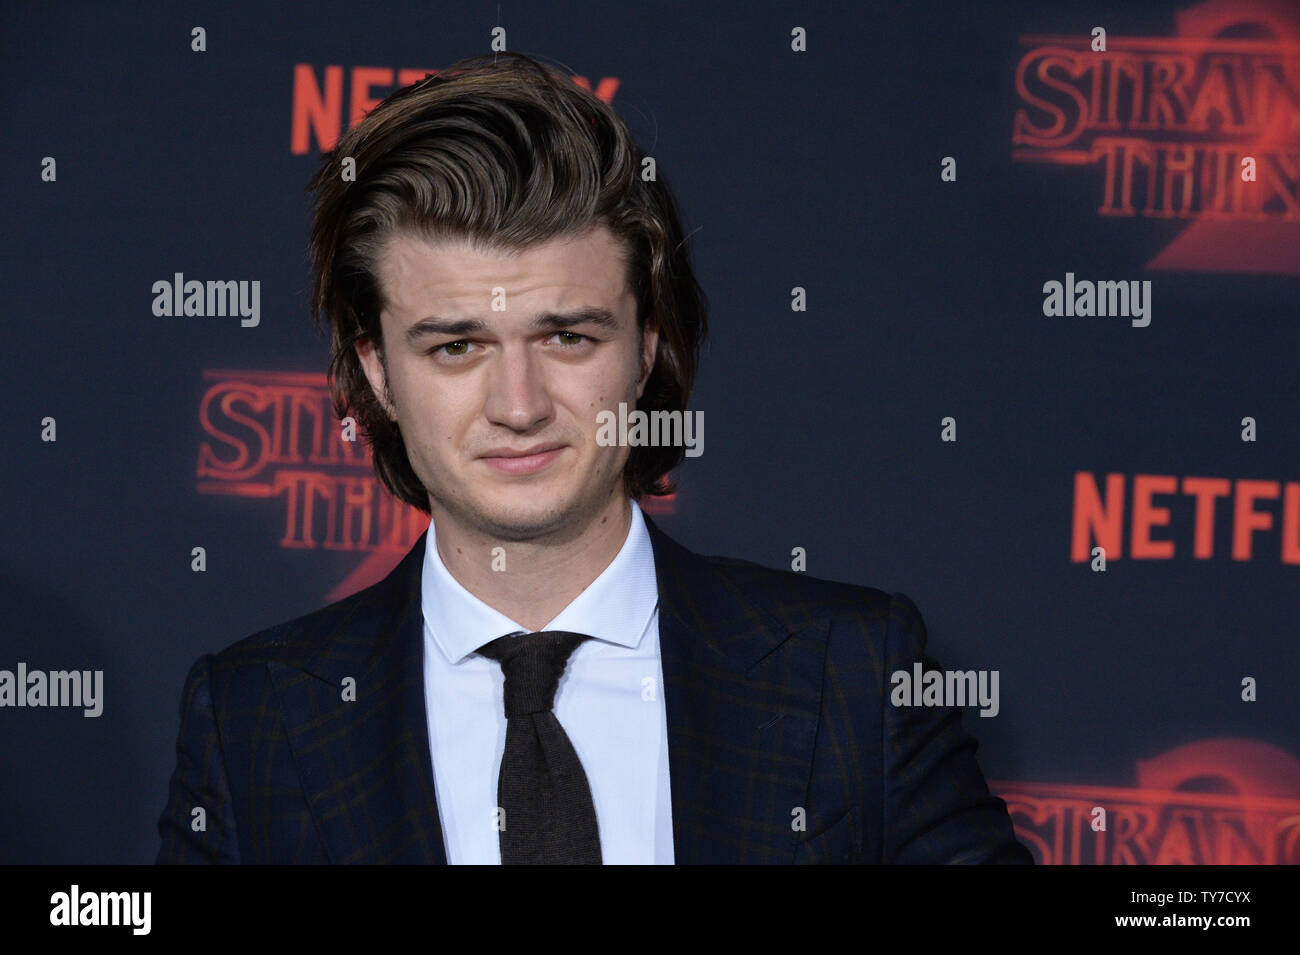 Photos: What the Stranger Things Cast Wore at the Season 4 Premiere